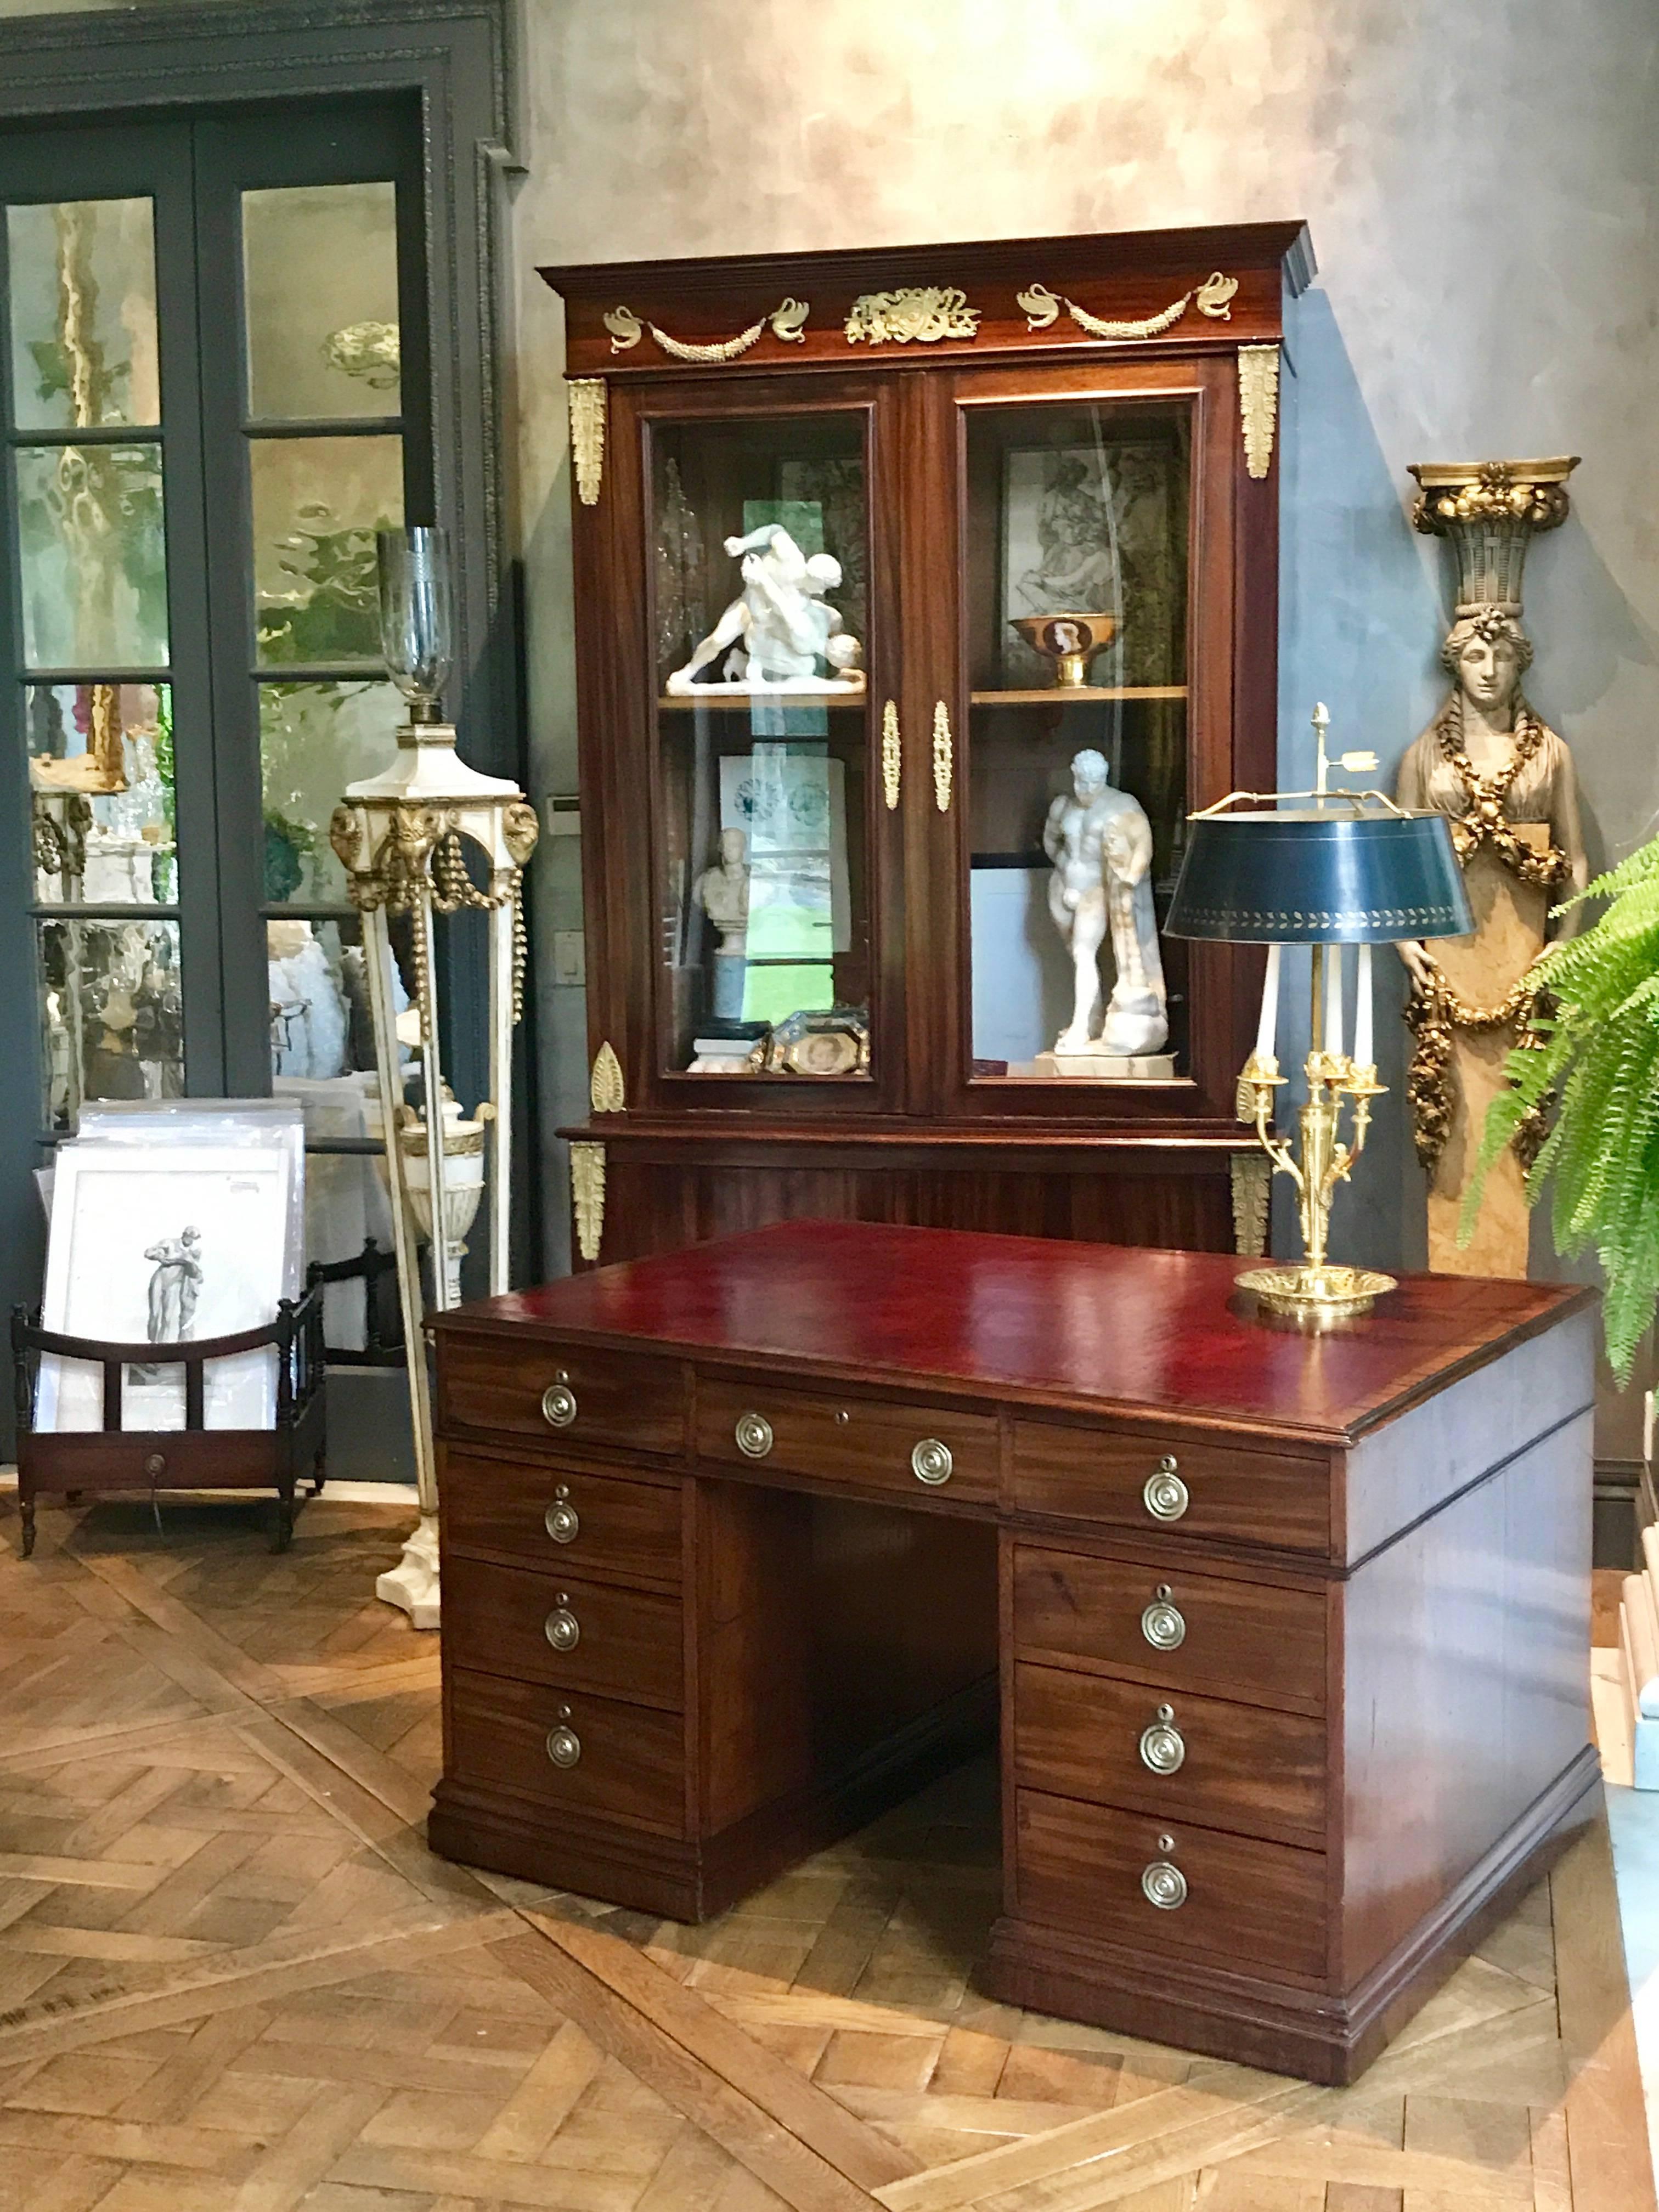 This beautiful George III period mahogany pedestal partners desk has an embossed deep red leather top.
There are 18 drawers in total. 
Made in England, circa 1830.